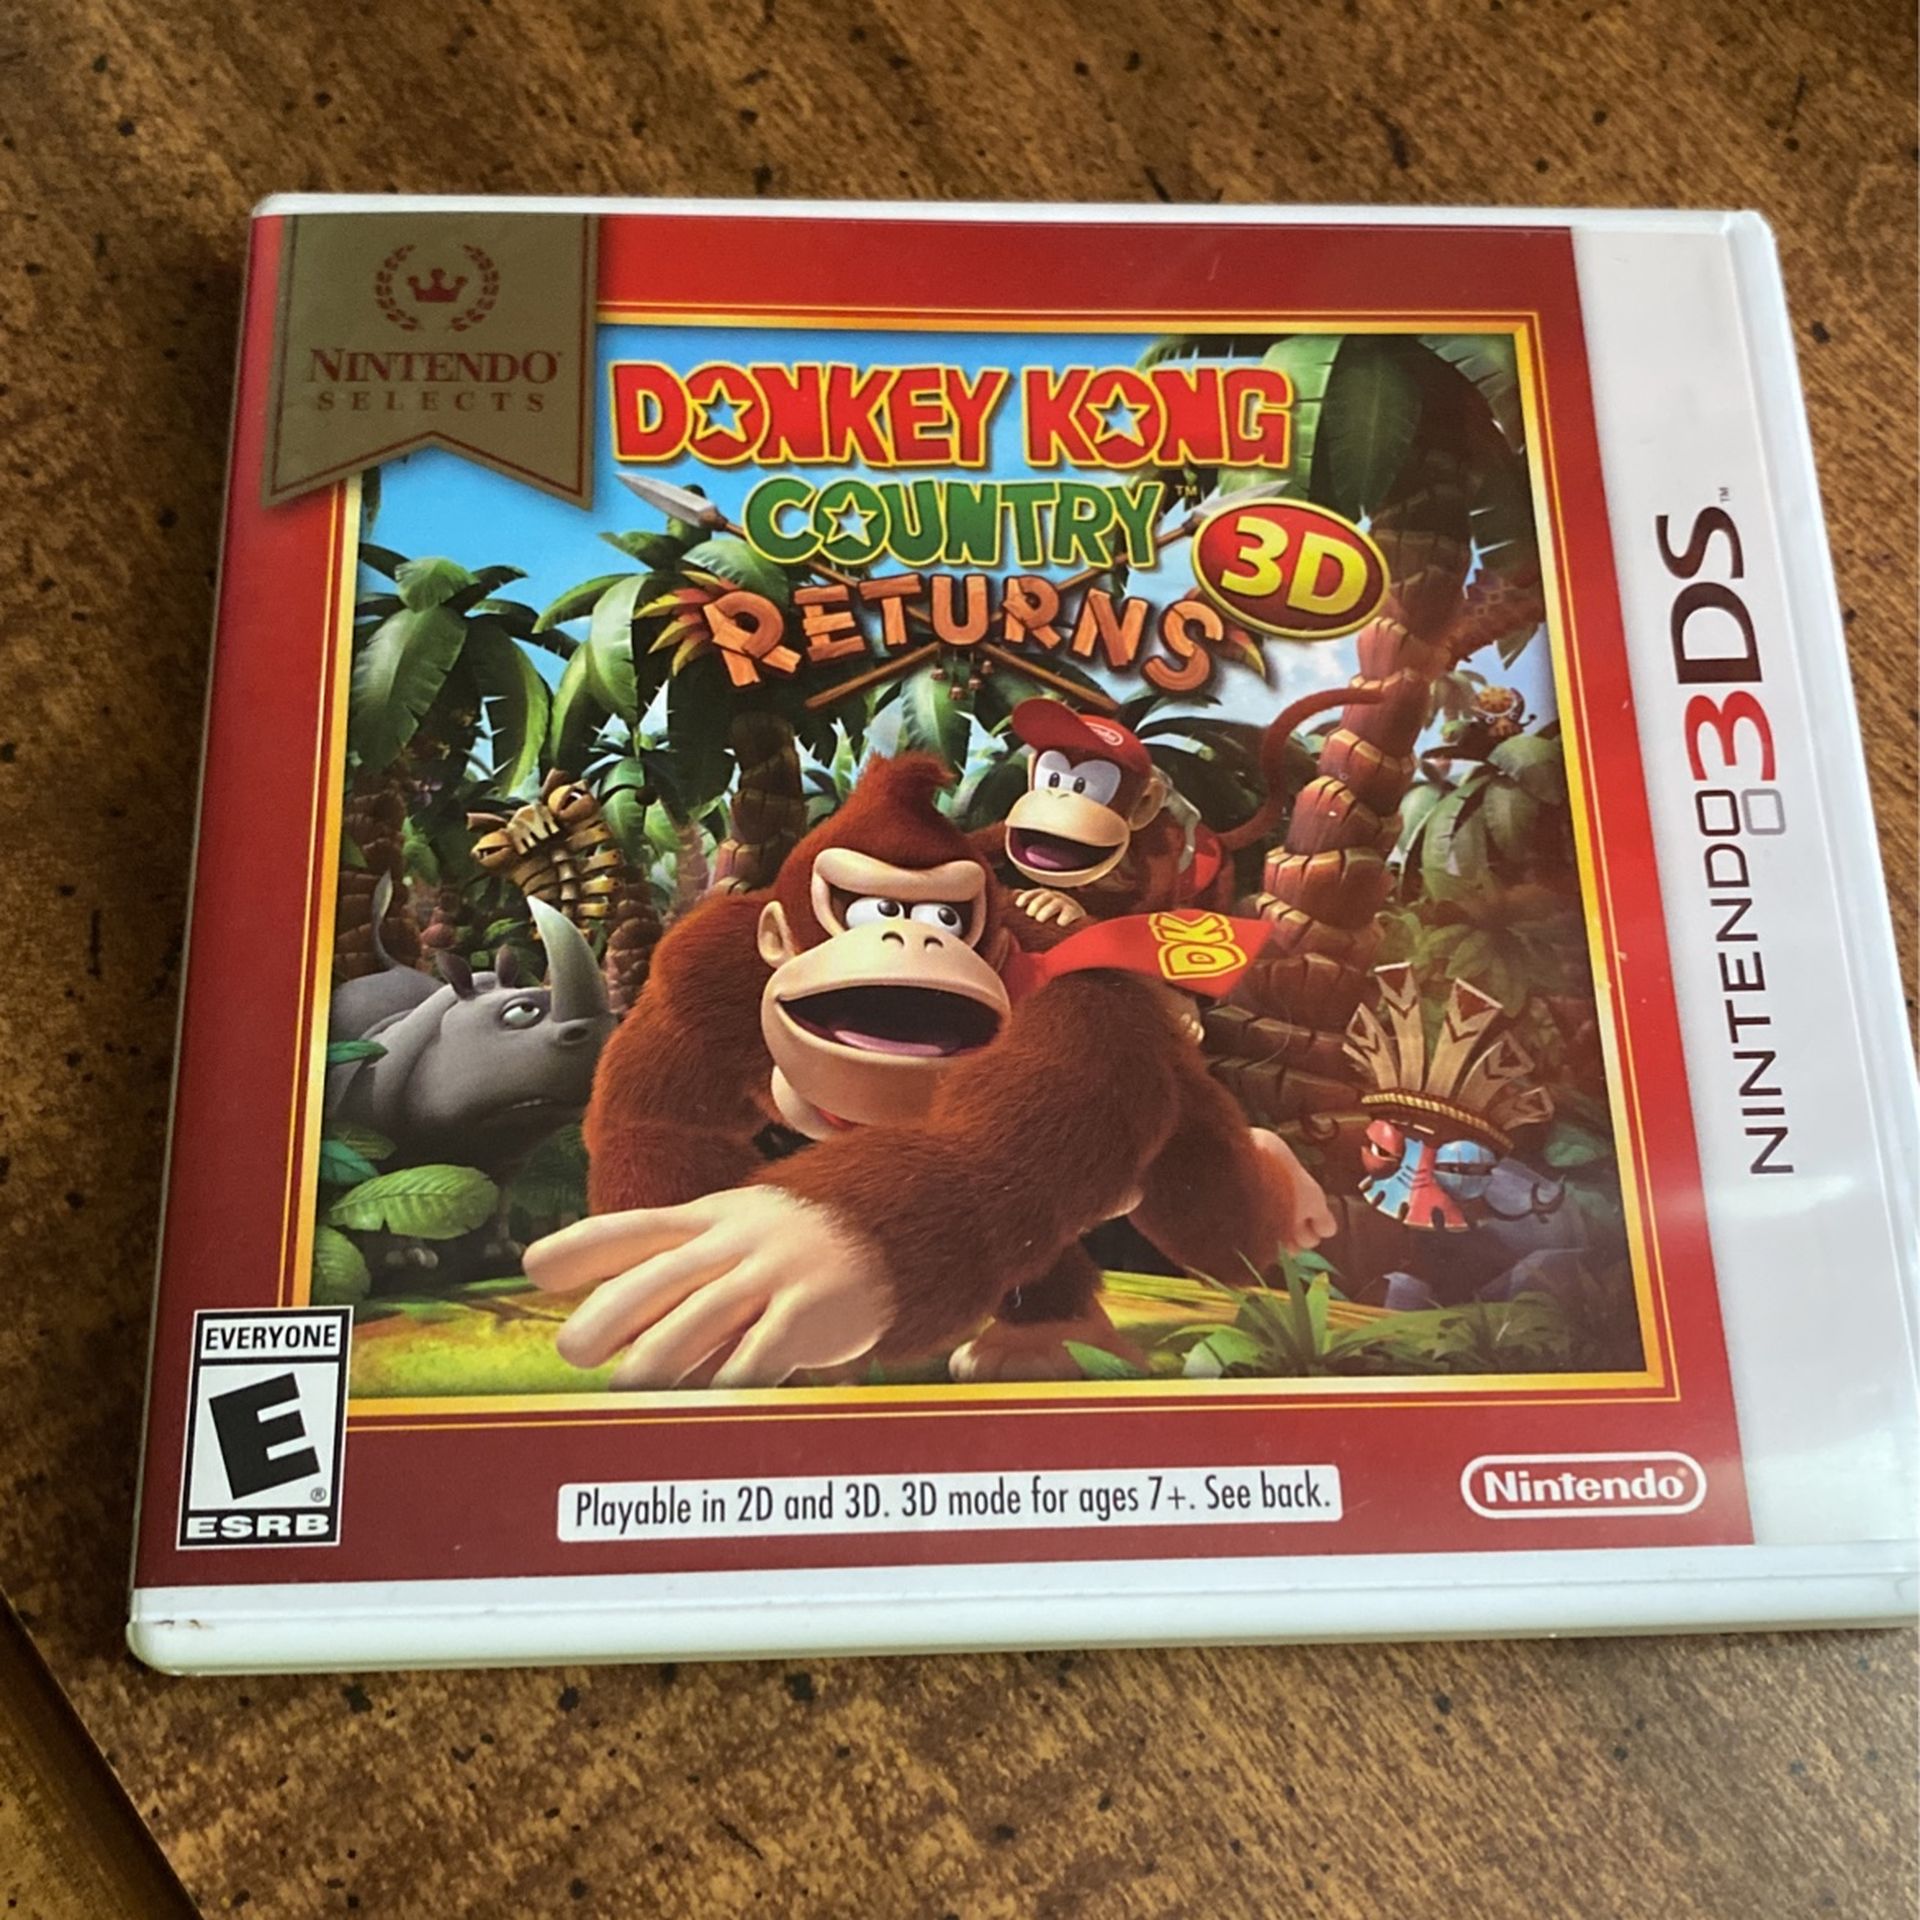 3Ds-Donket kong Country Returns 3D